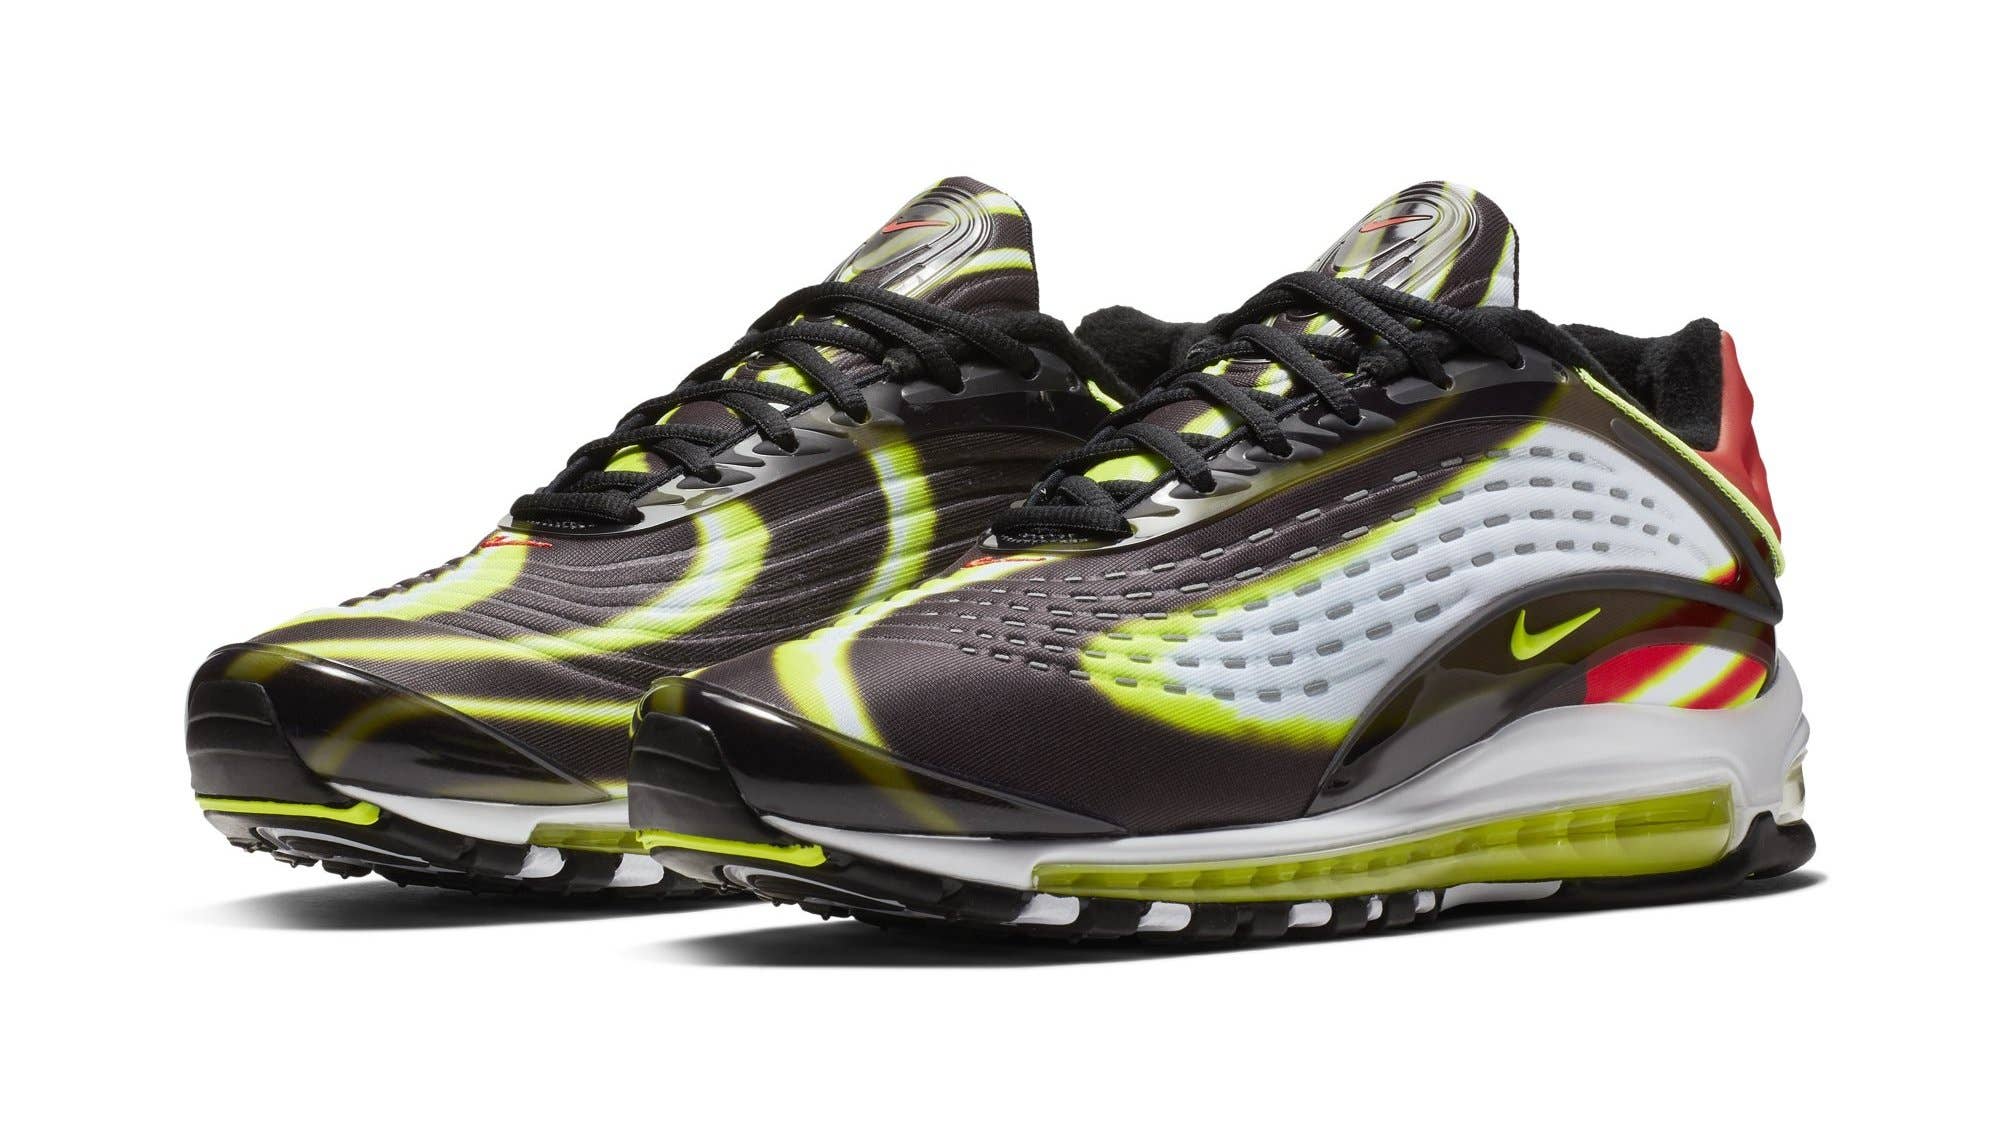 Nike Air Max Deluxe 'Black/Volt Habanero Red White' AJ7831 003 Release Date